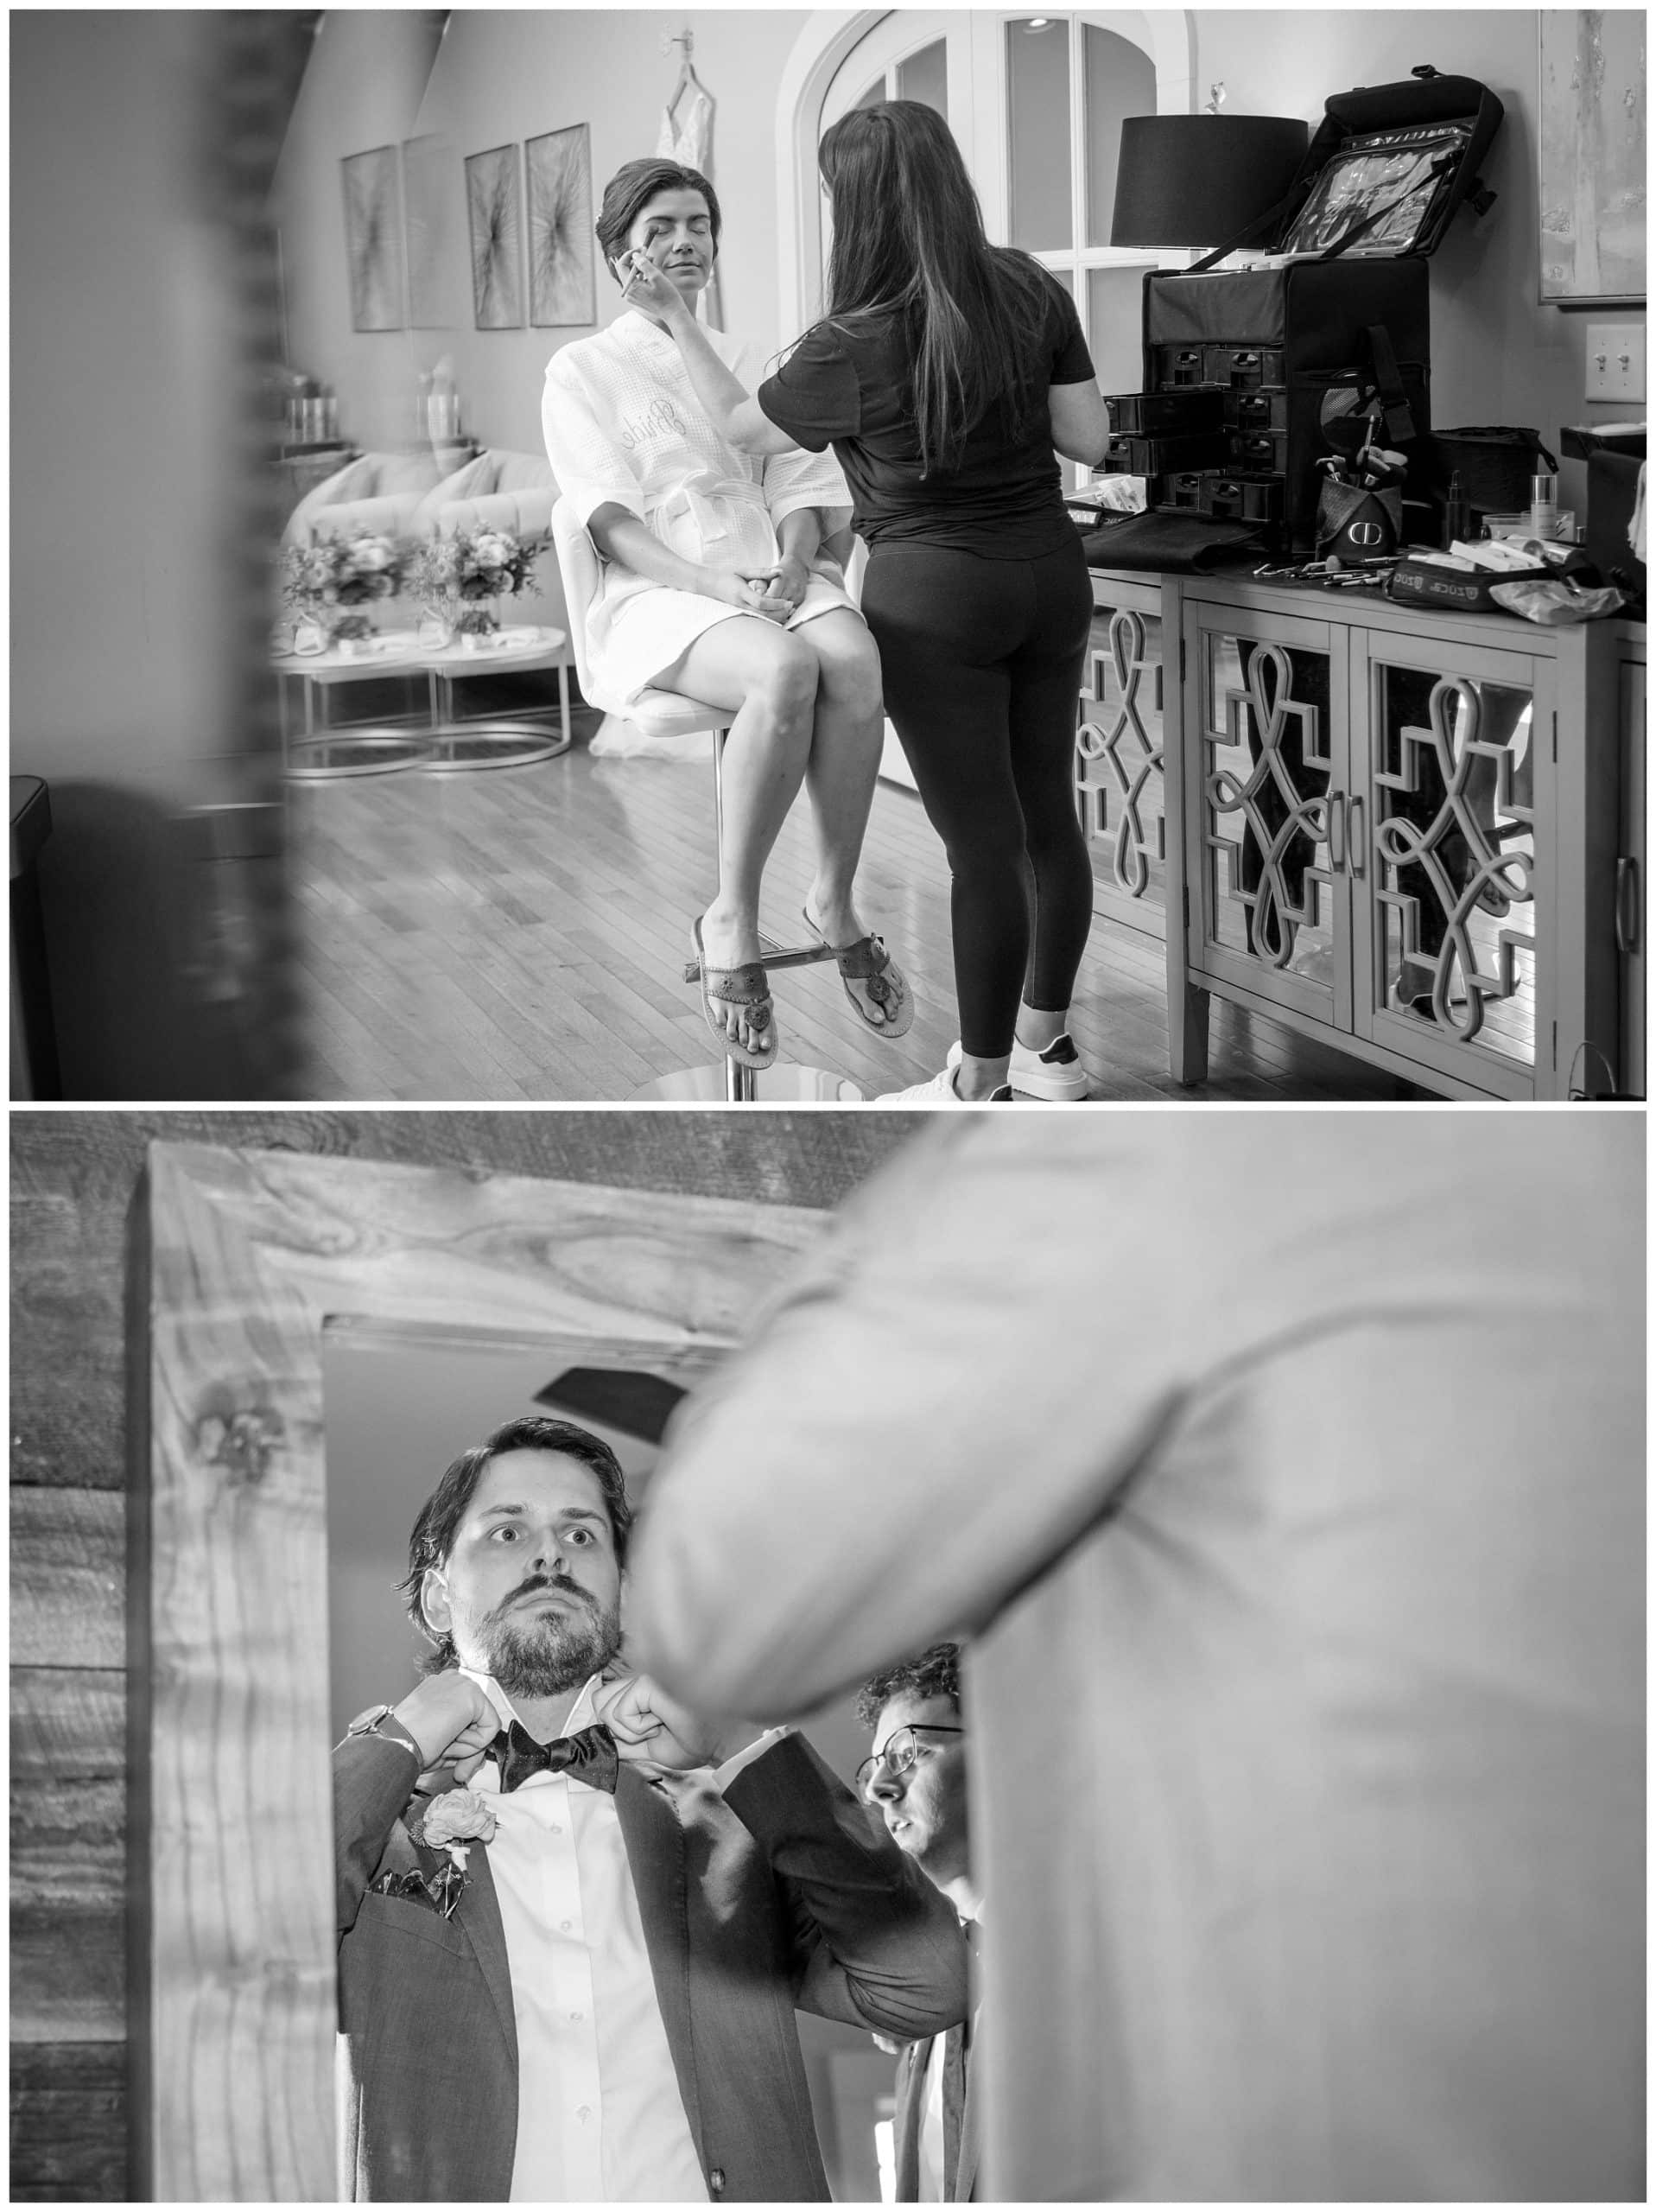 Black and white photos of bride & groom getting ready for his wedding.